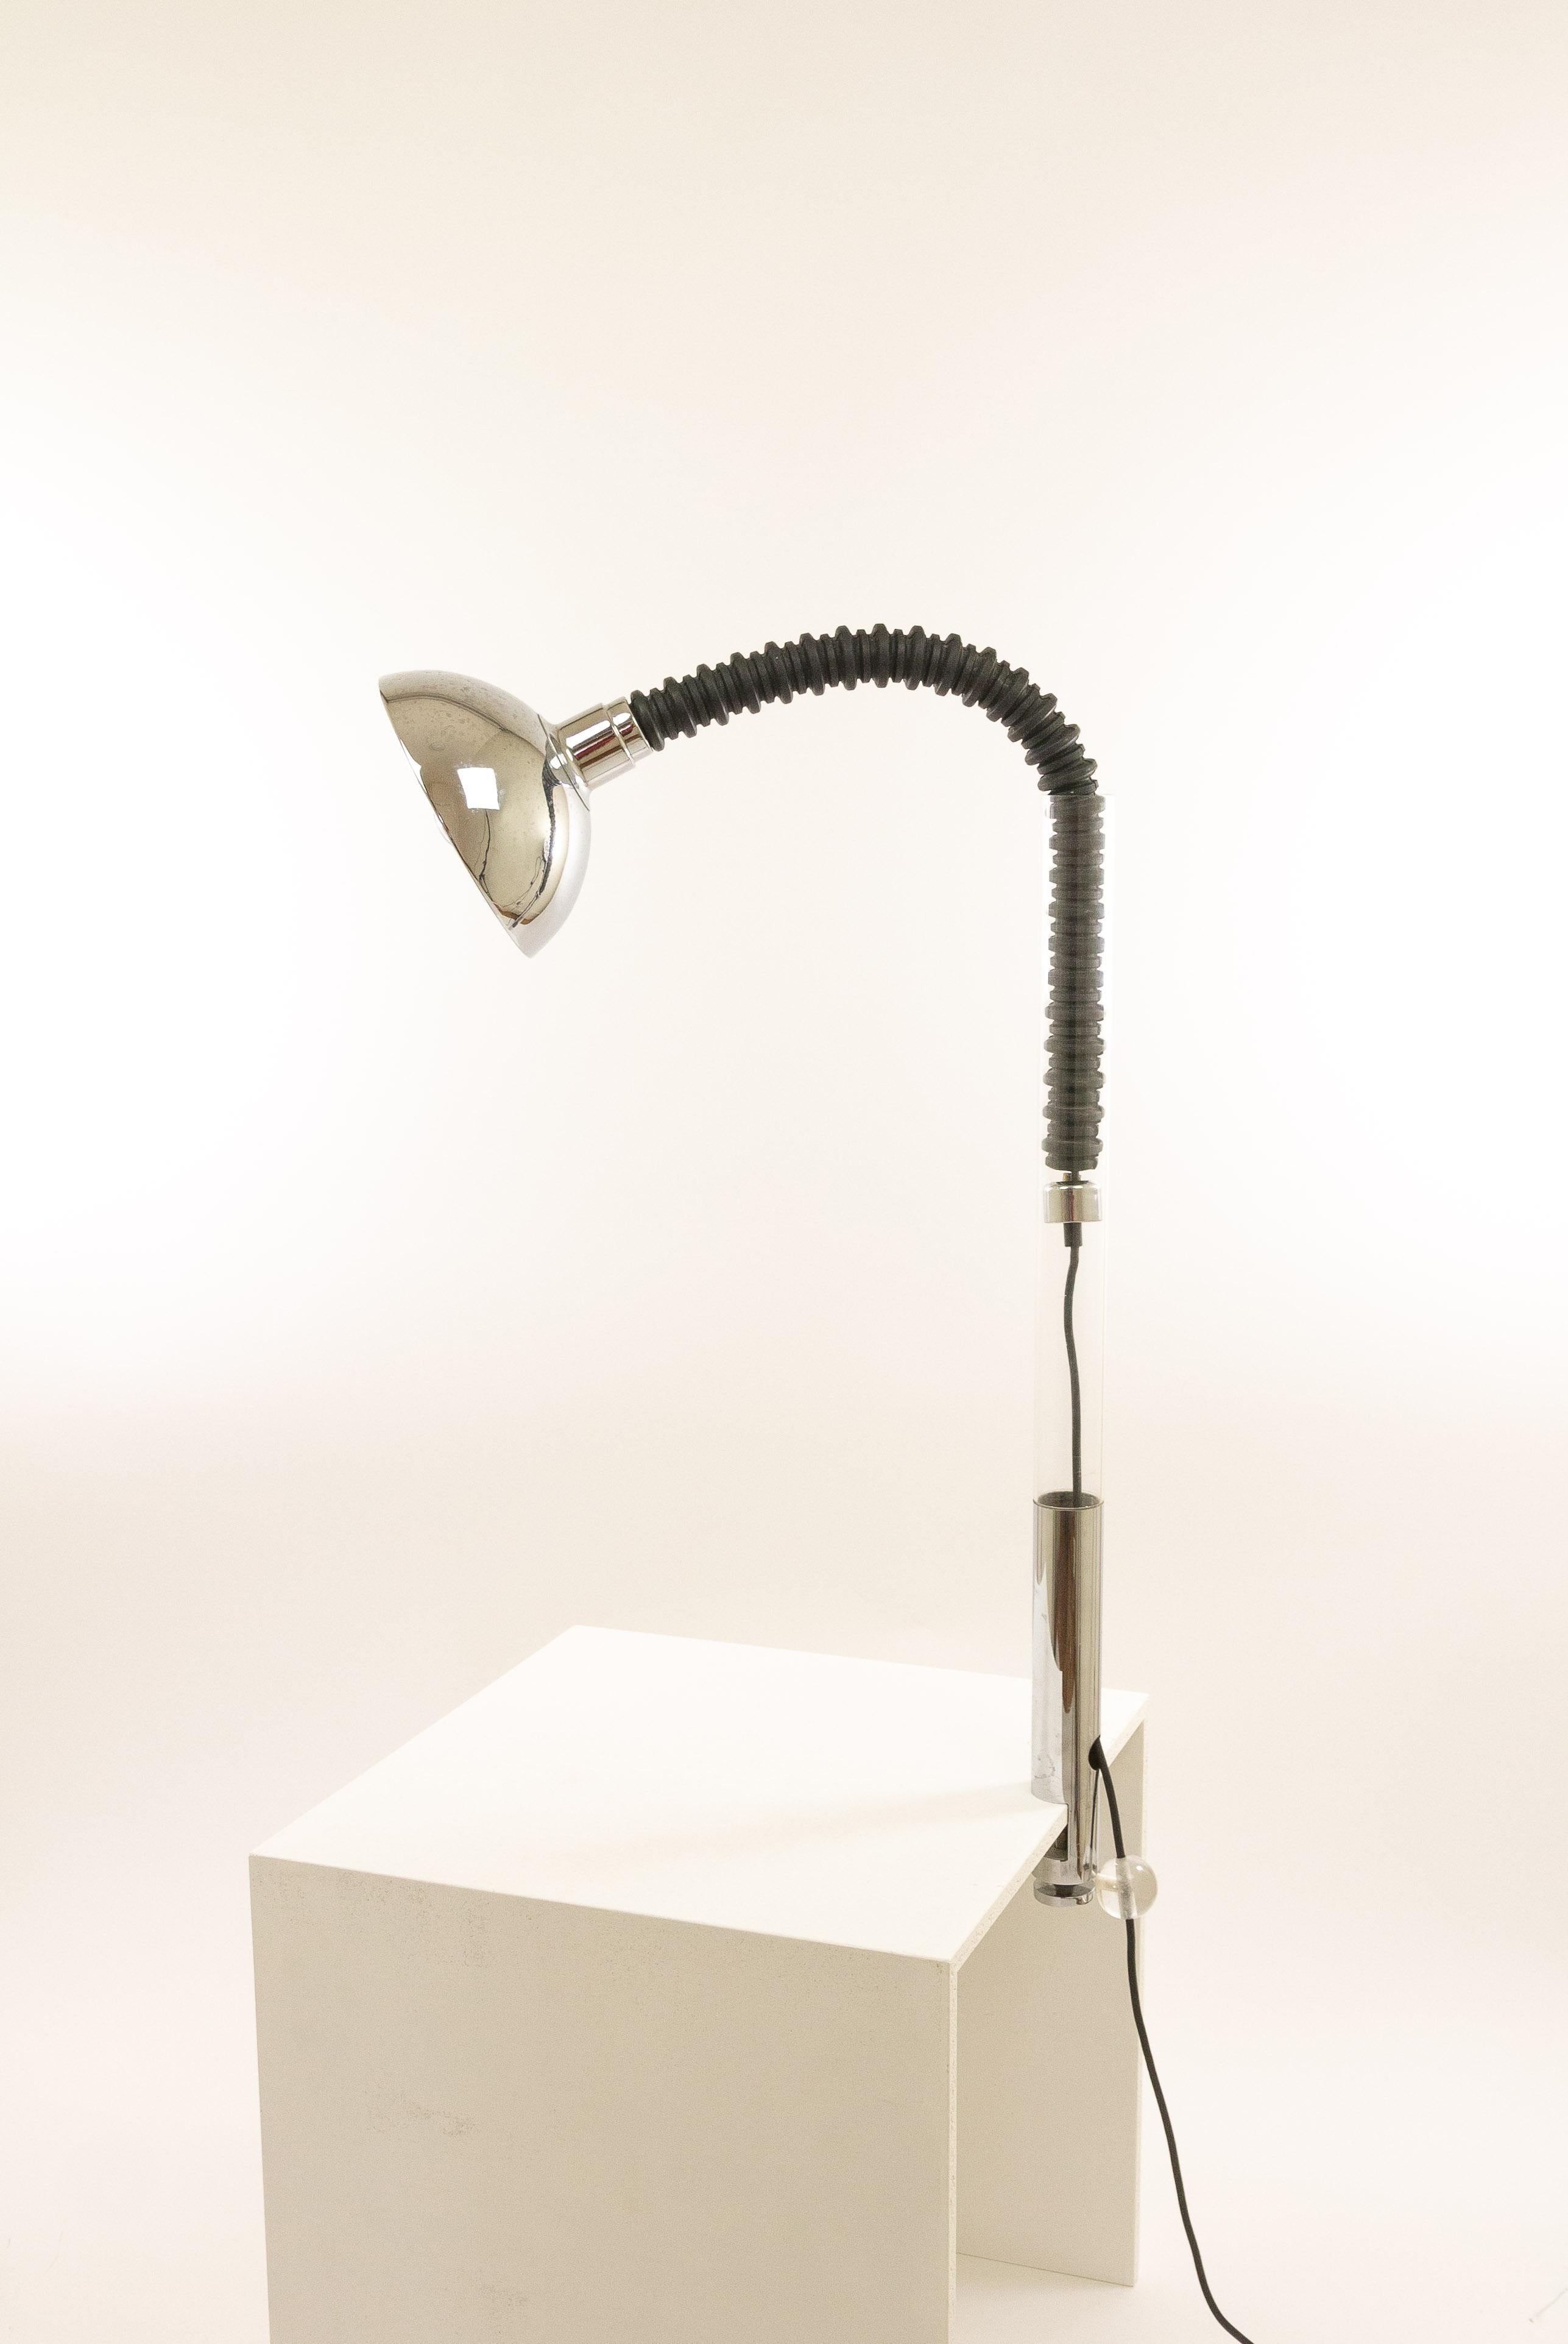 Chrome and plexiglass clamp table lamp with flexible arm designed and produced by Cosack Leuchten in the 1970s.

The flexible, partly rubber arm can be pulled out. In this way the reflector can be placed in different positions, so that the lamp can